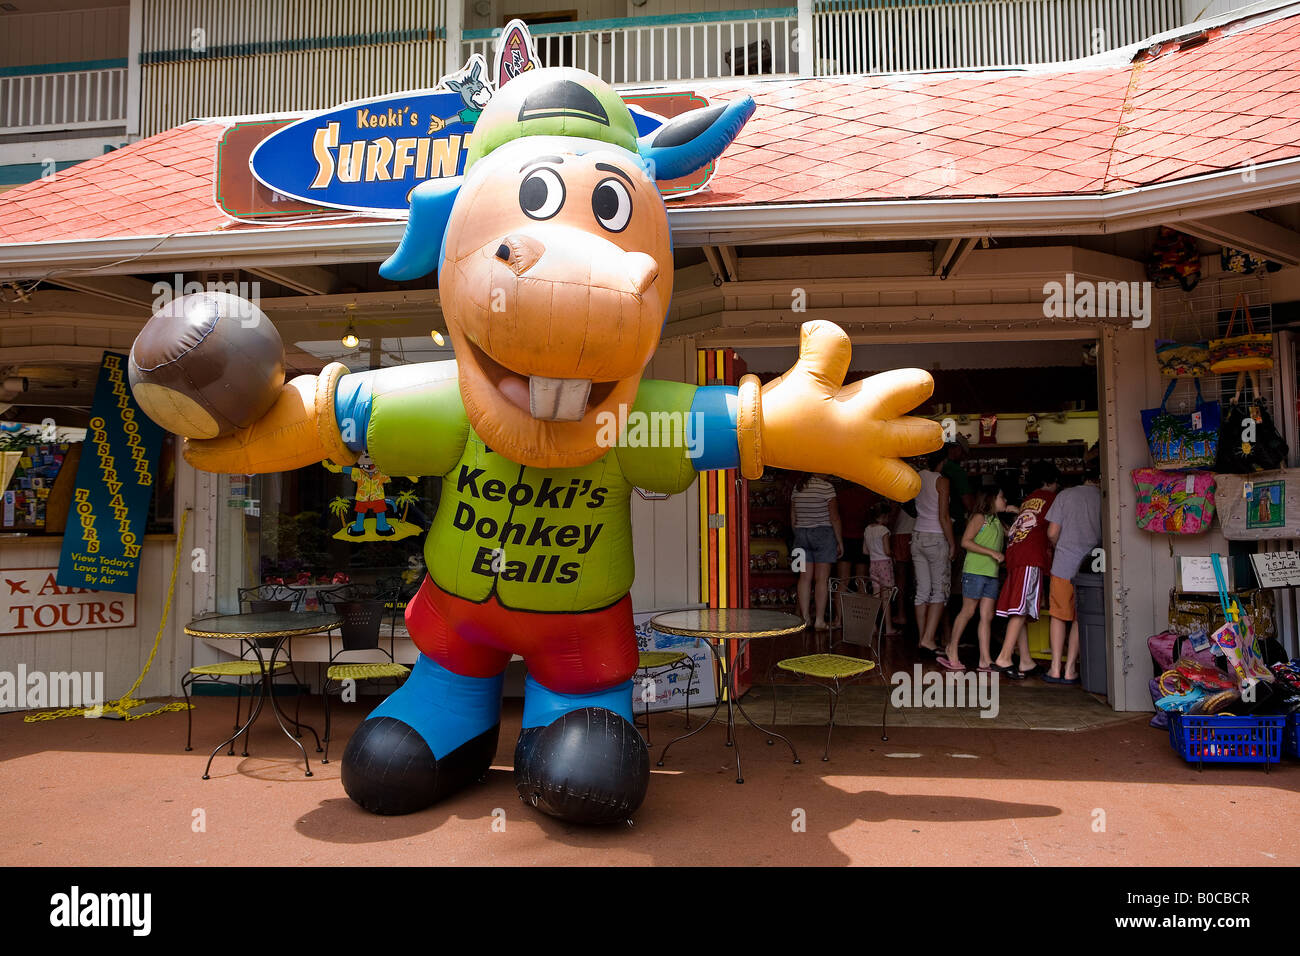 Image of the exterior of Keoki s Donkey Balls storefront including the huge inflatable donkey and a few shoppers inside store Stock Photo